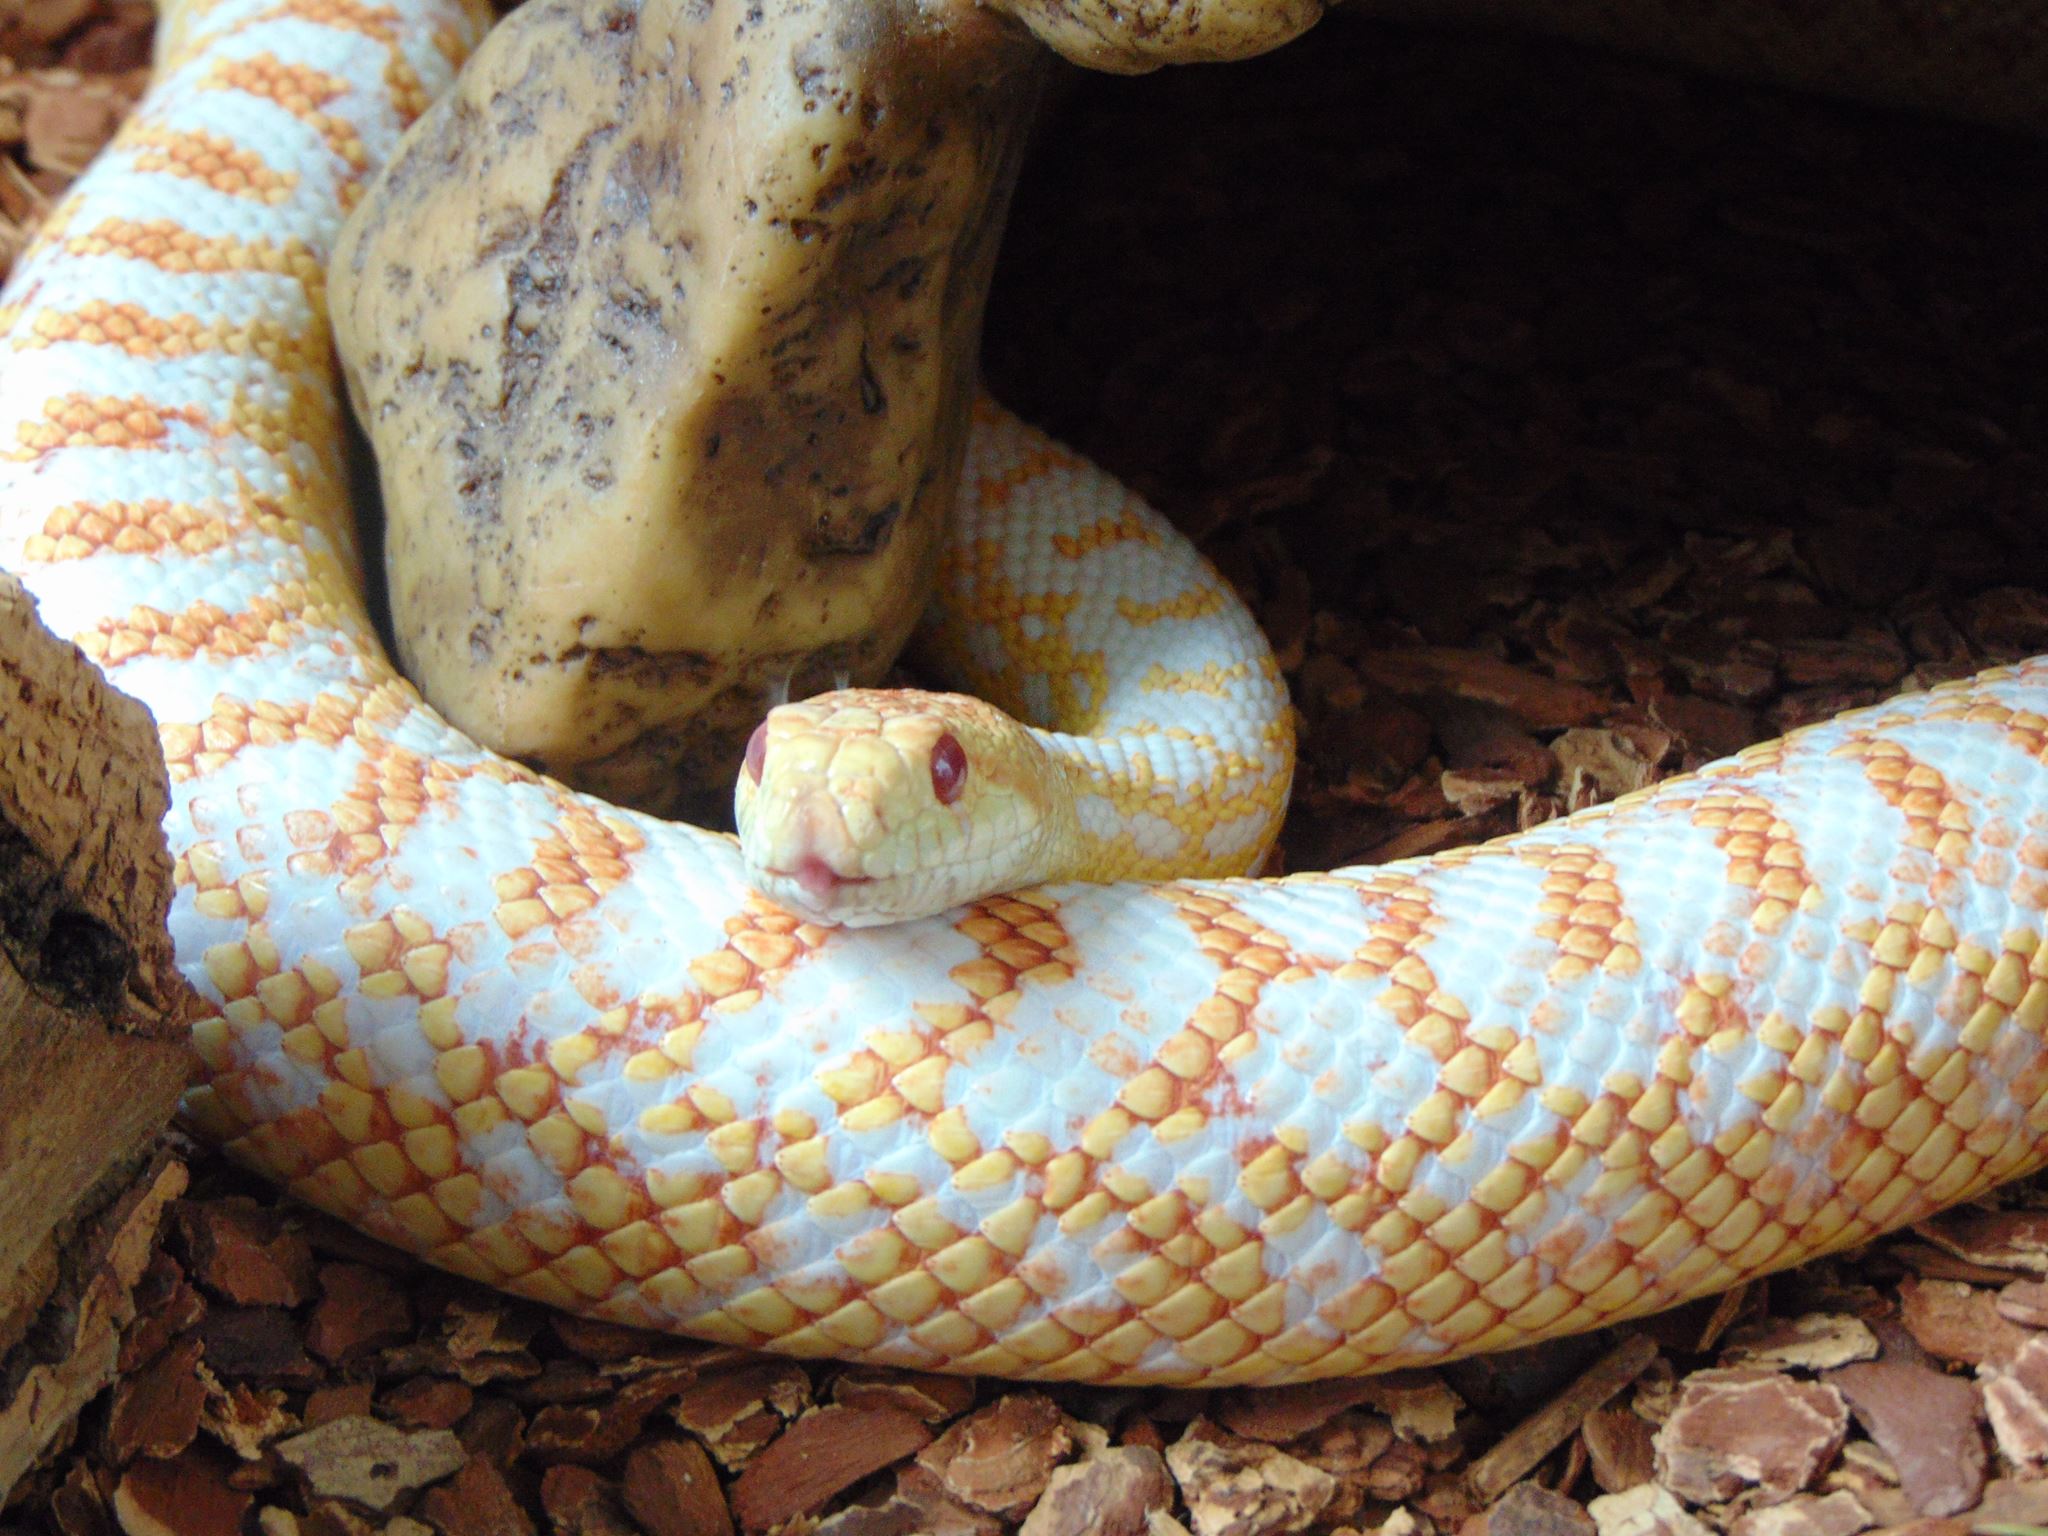 Pituophis catenifer annectans albinos - Source anonyme